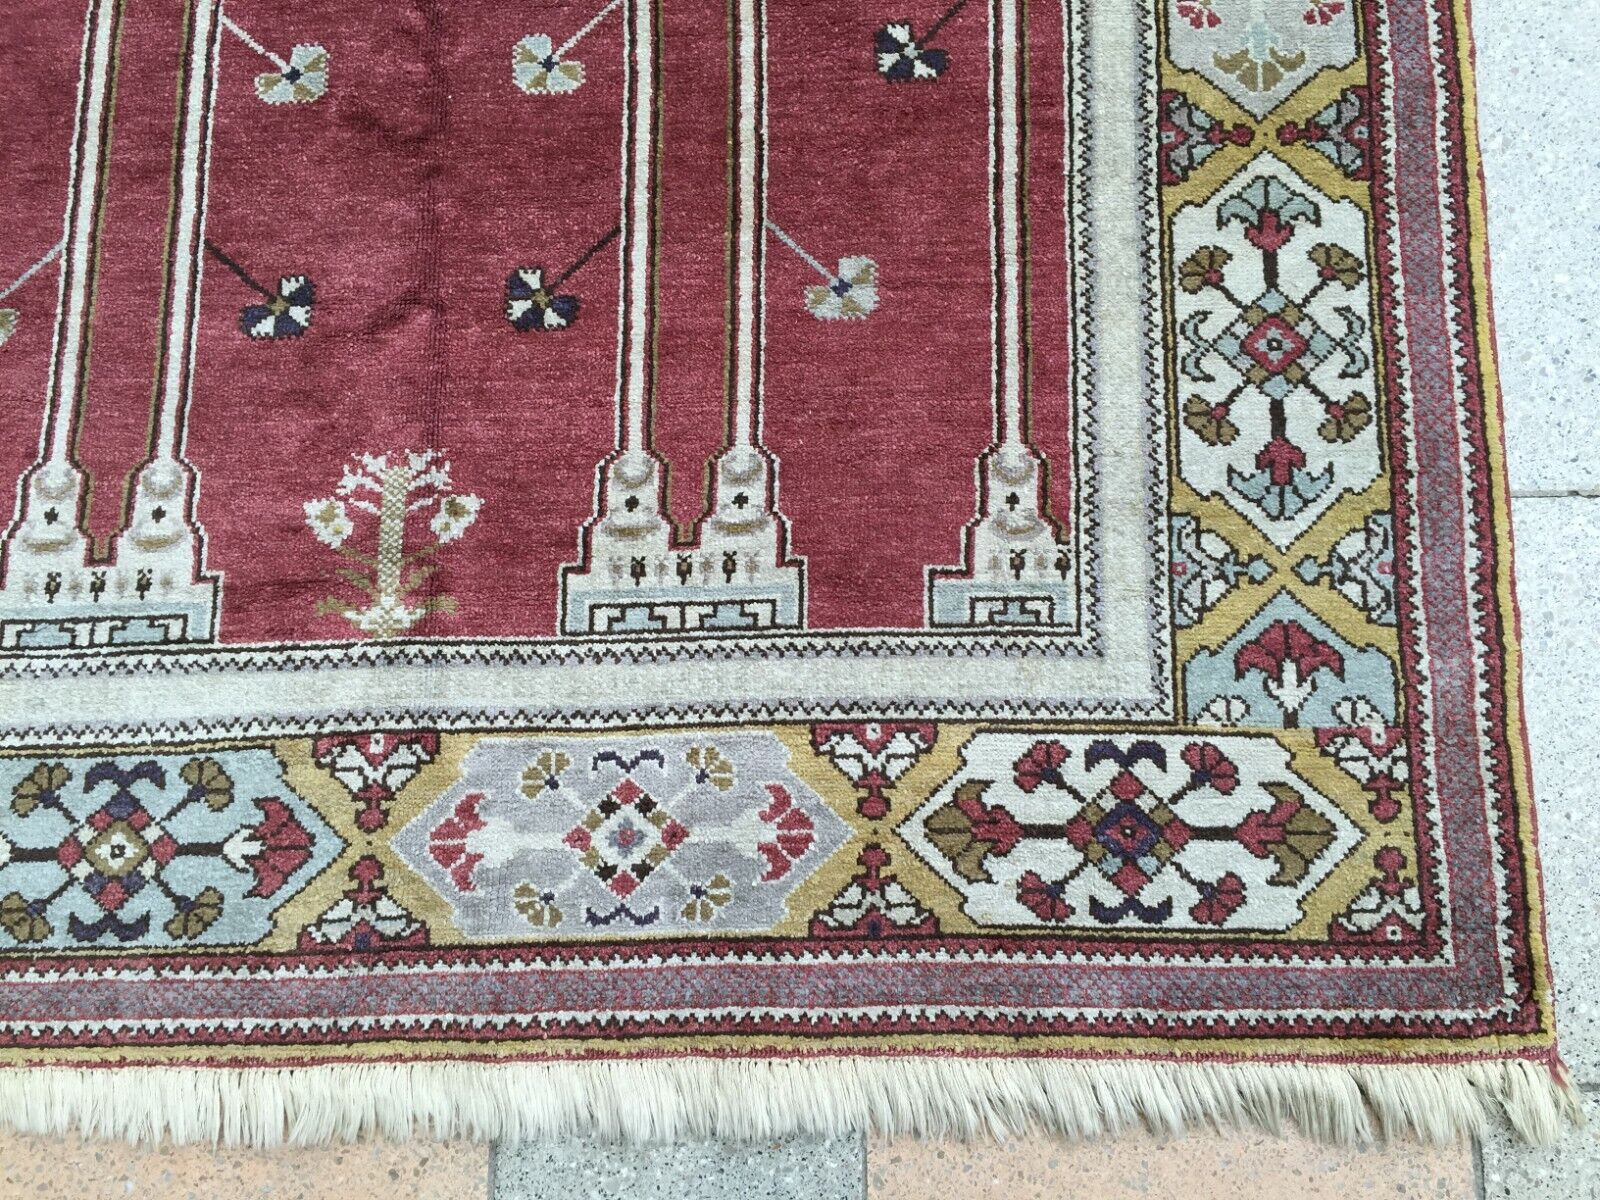 Overhead shot of the rug displaying its symmetrical patterns and design details